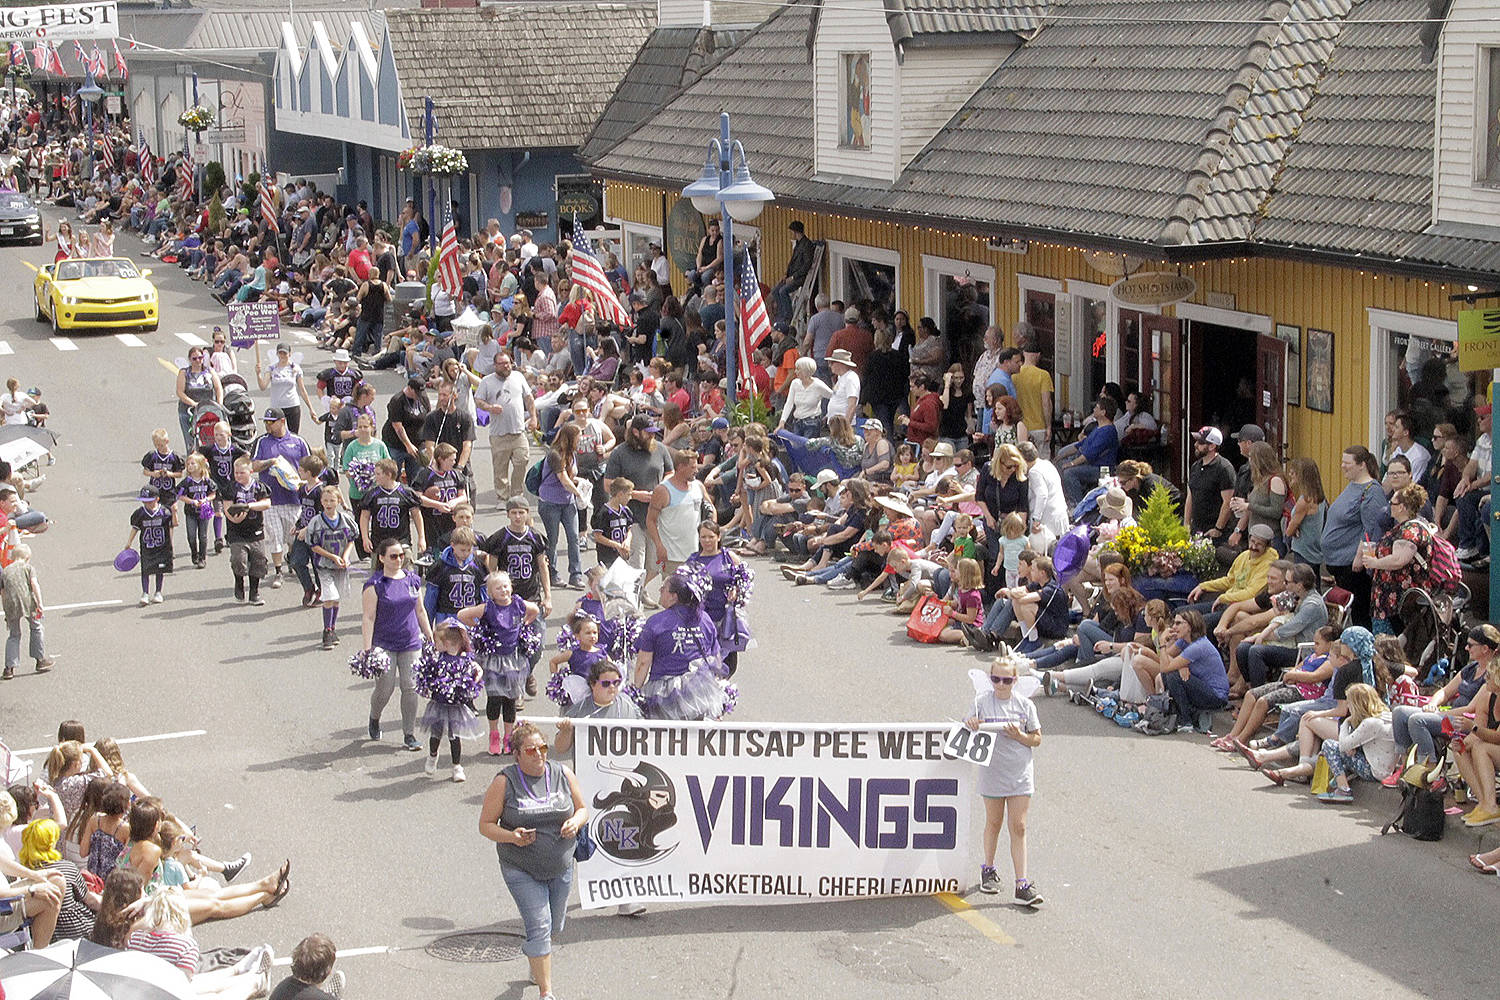 Schedule announced for Viking Fest